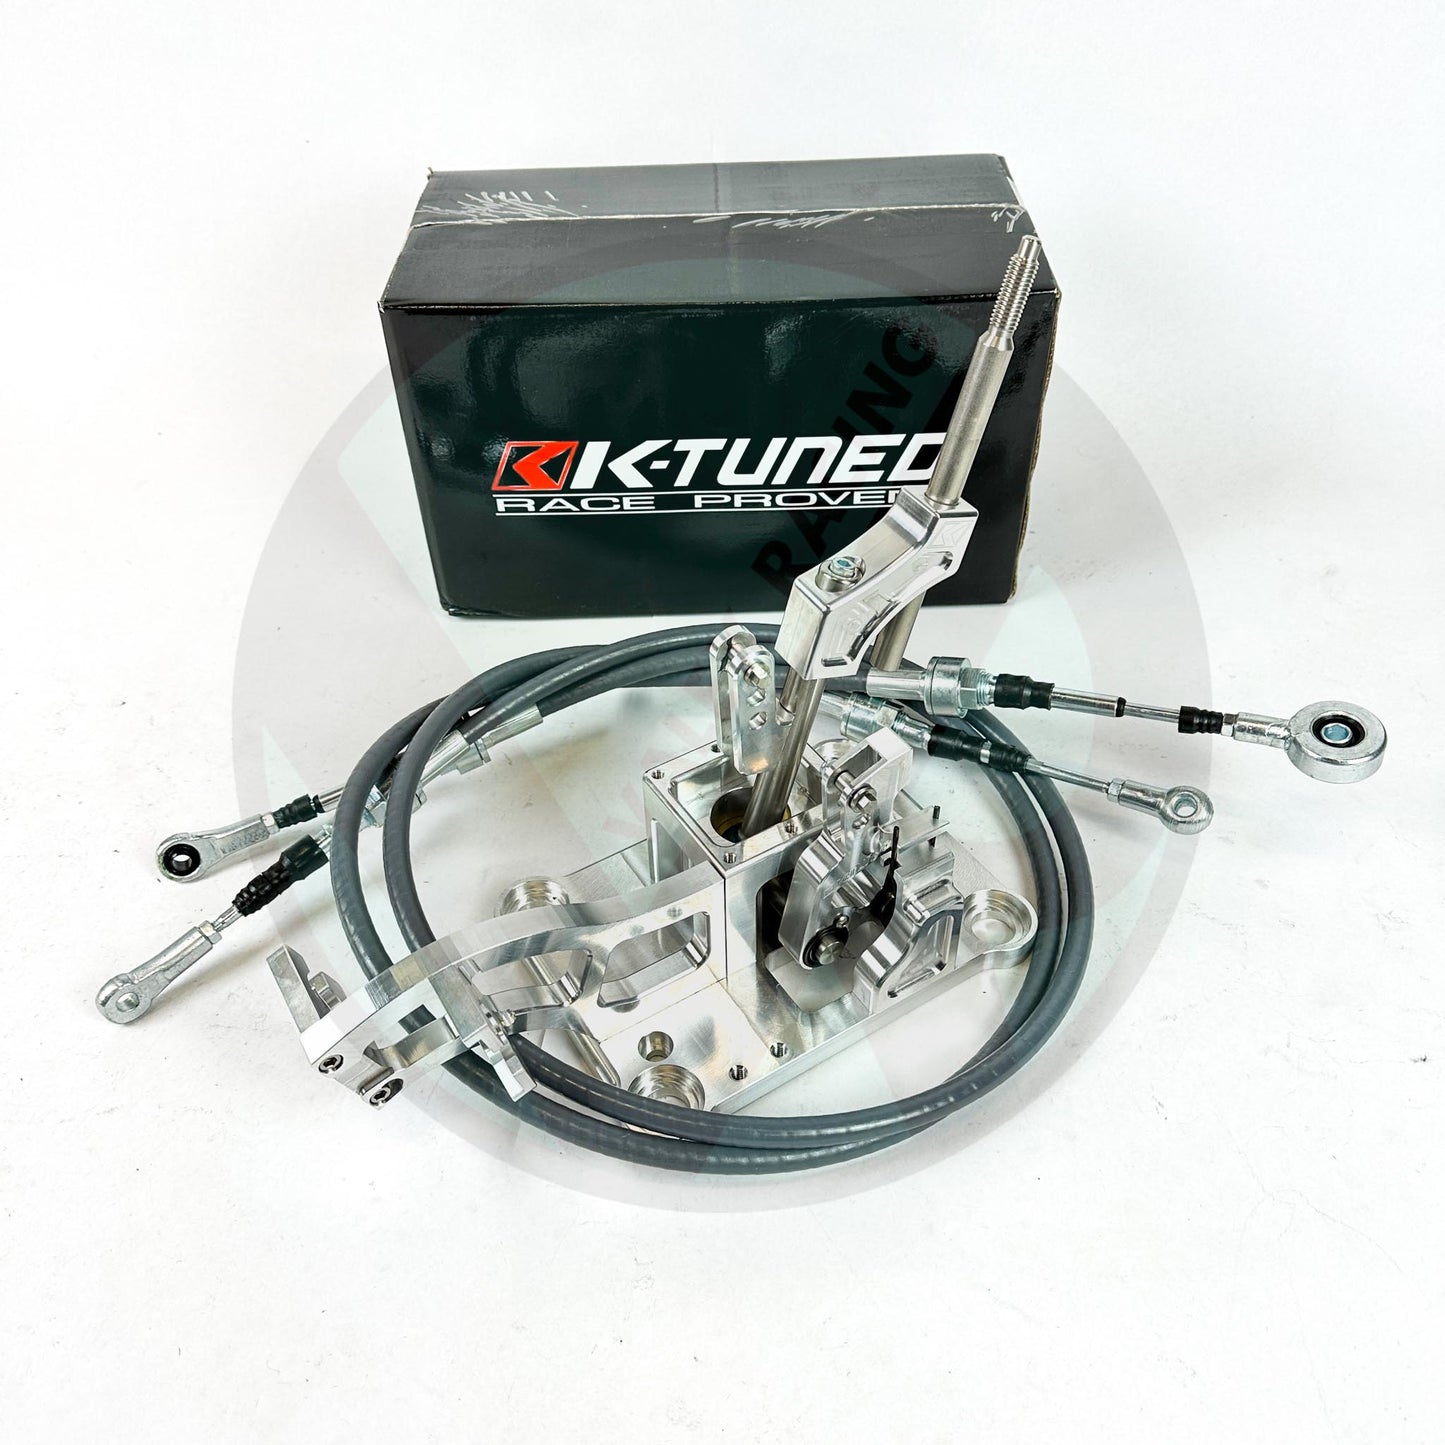 K Tuned Street Rev 2 Billet RSX Shifter and Shifter Cables